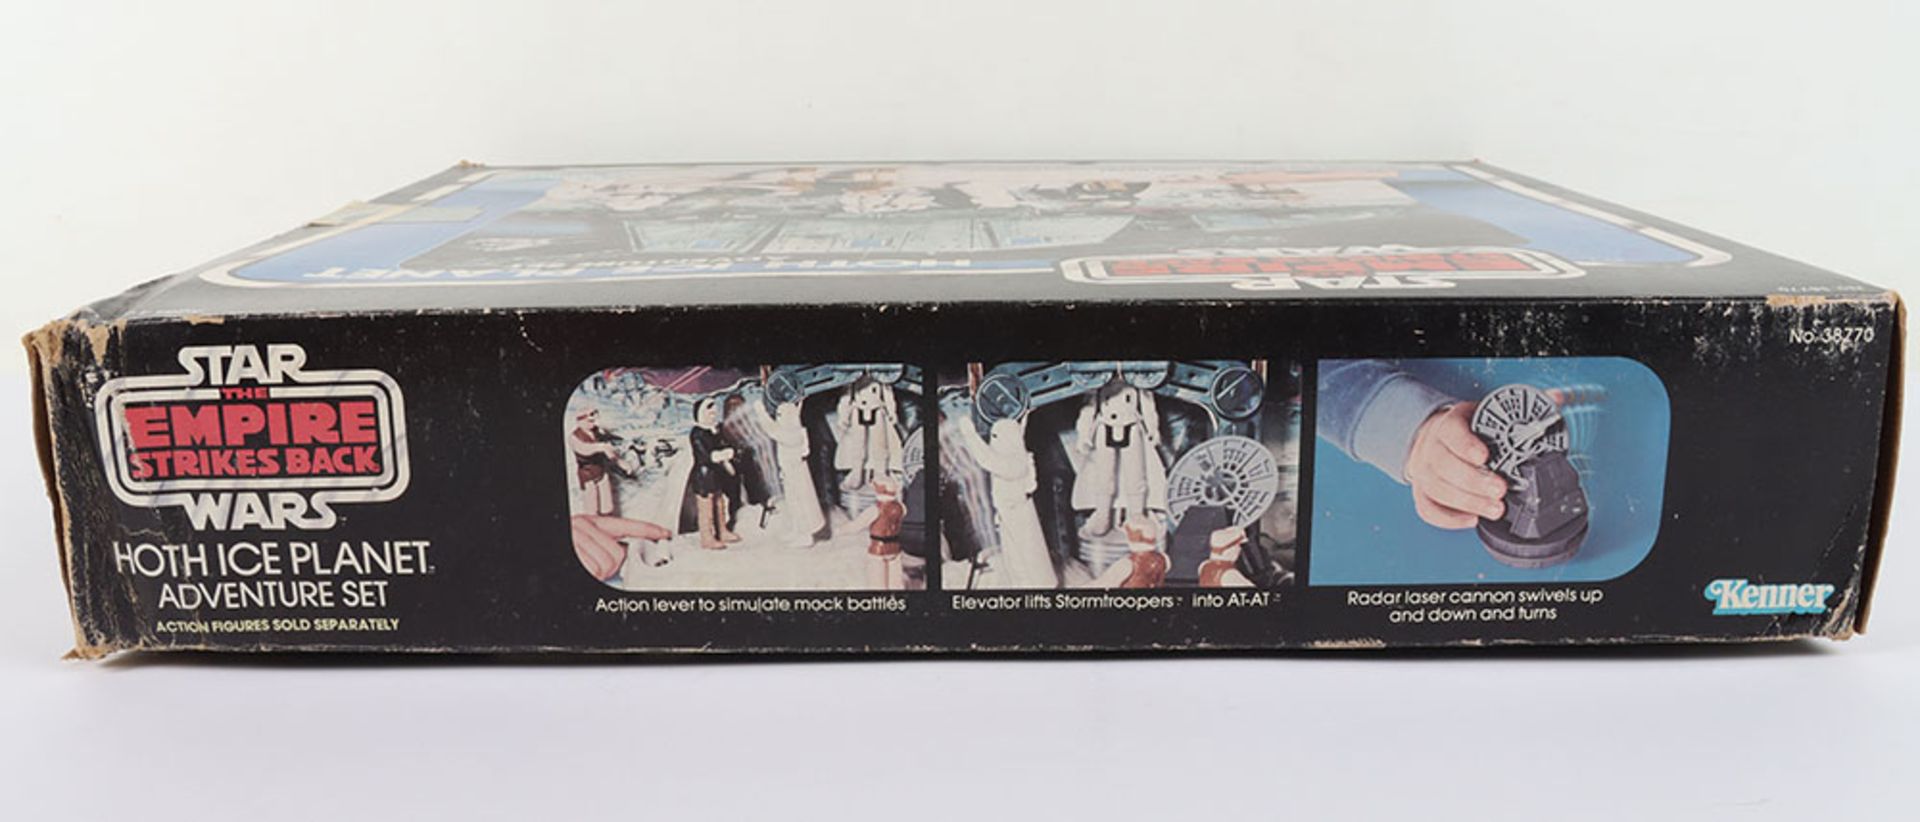 Boxed Vintage Kenner Star Wars The Empire Strikes Back Hoth Ice Planet Adventure Set - Image 14 of 16